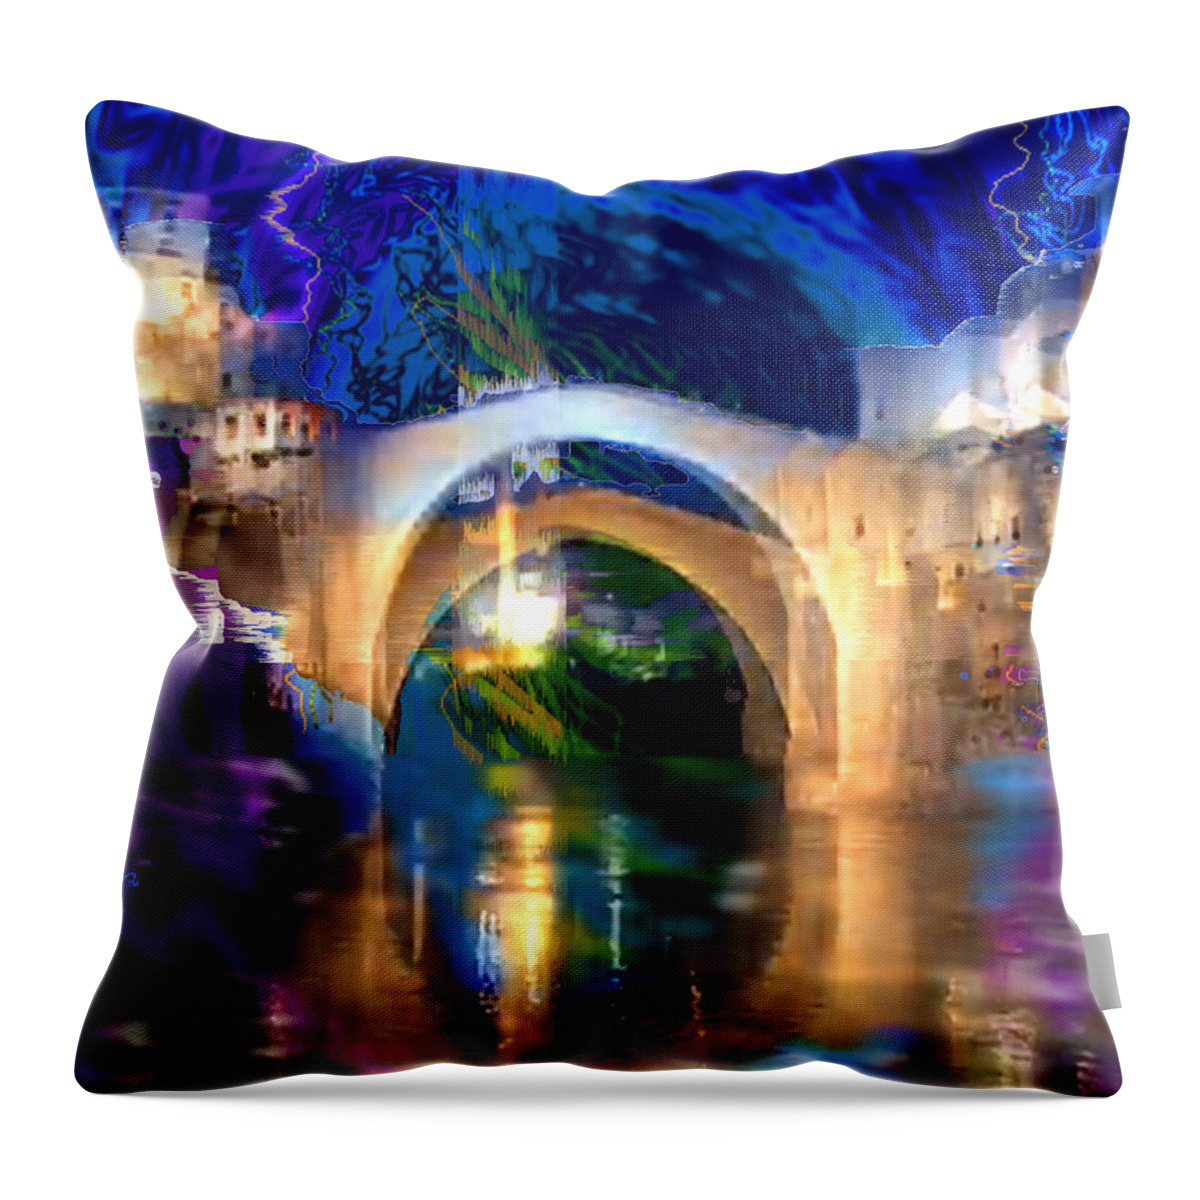 Bad Weather Coming Throw Pillow featuring the digital art Bad Weather Coming by Seth Weaver